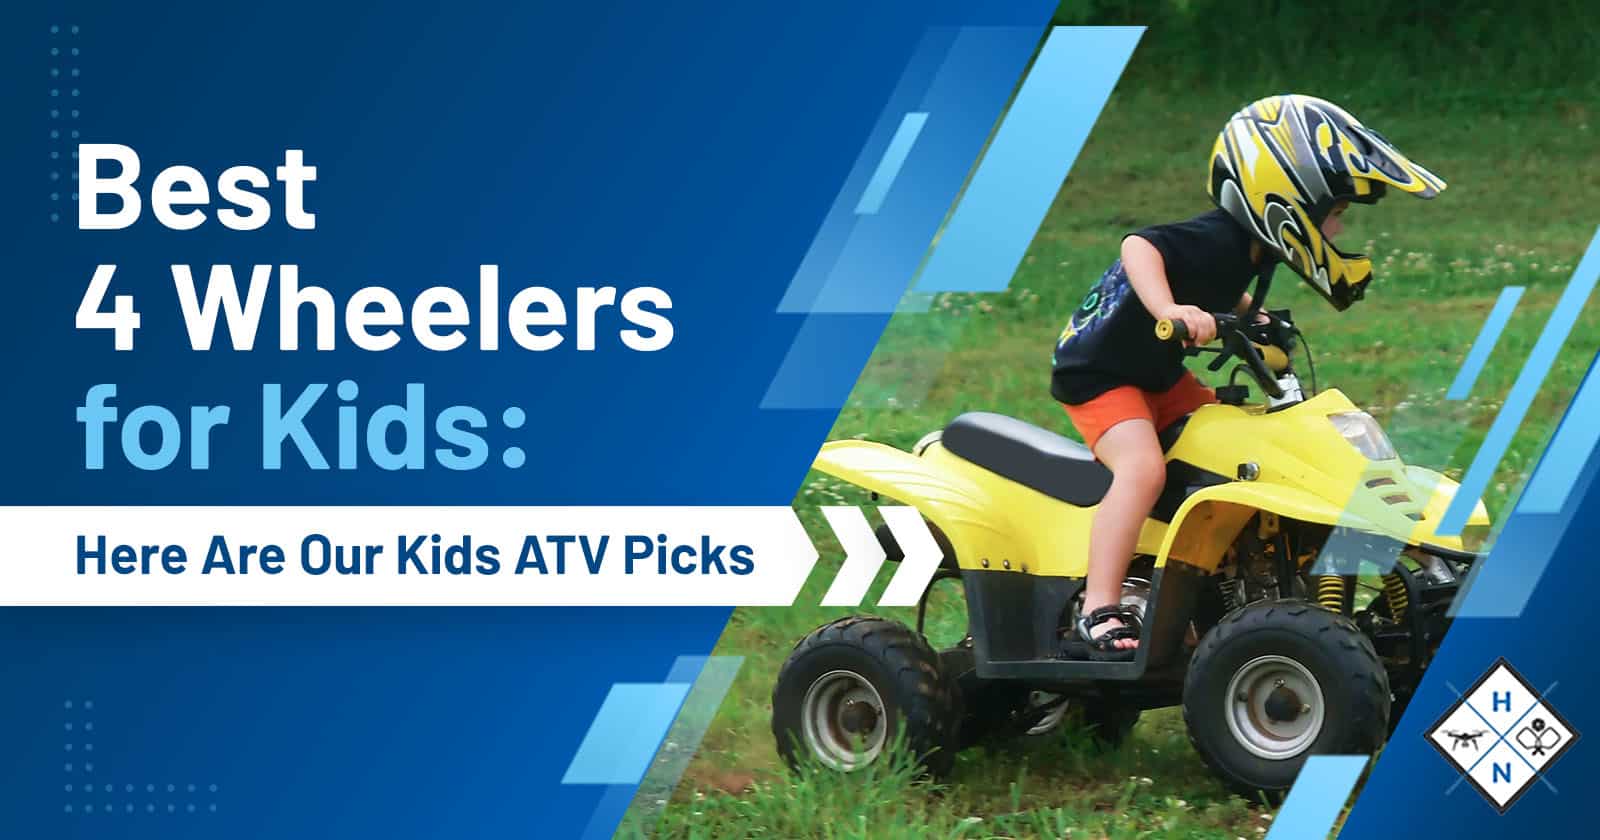 Best 4 Wheelers for Kids 2022: Here Are Our Kids ATV Picks